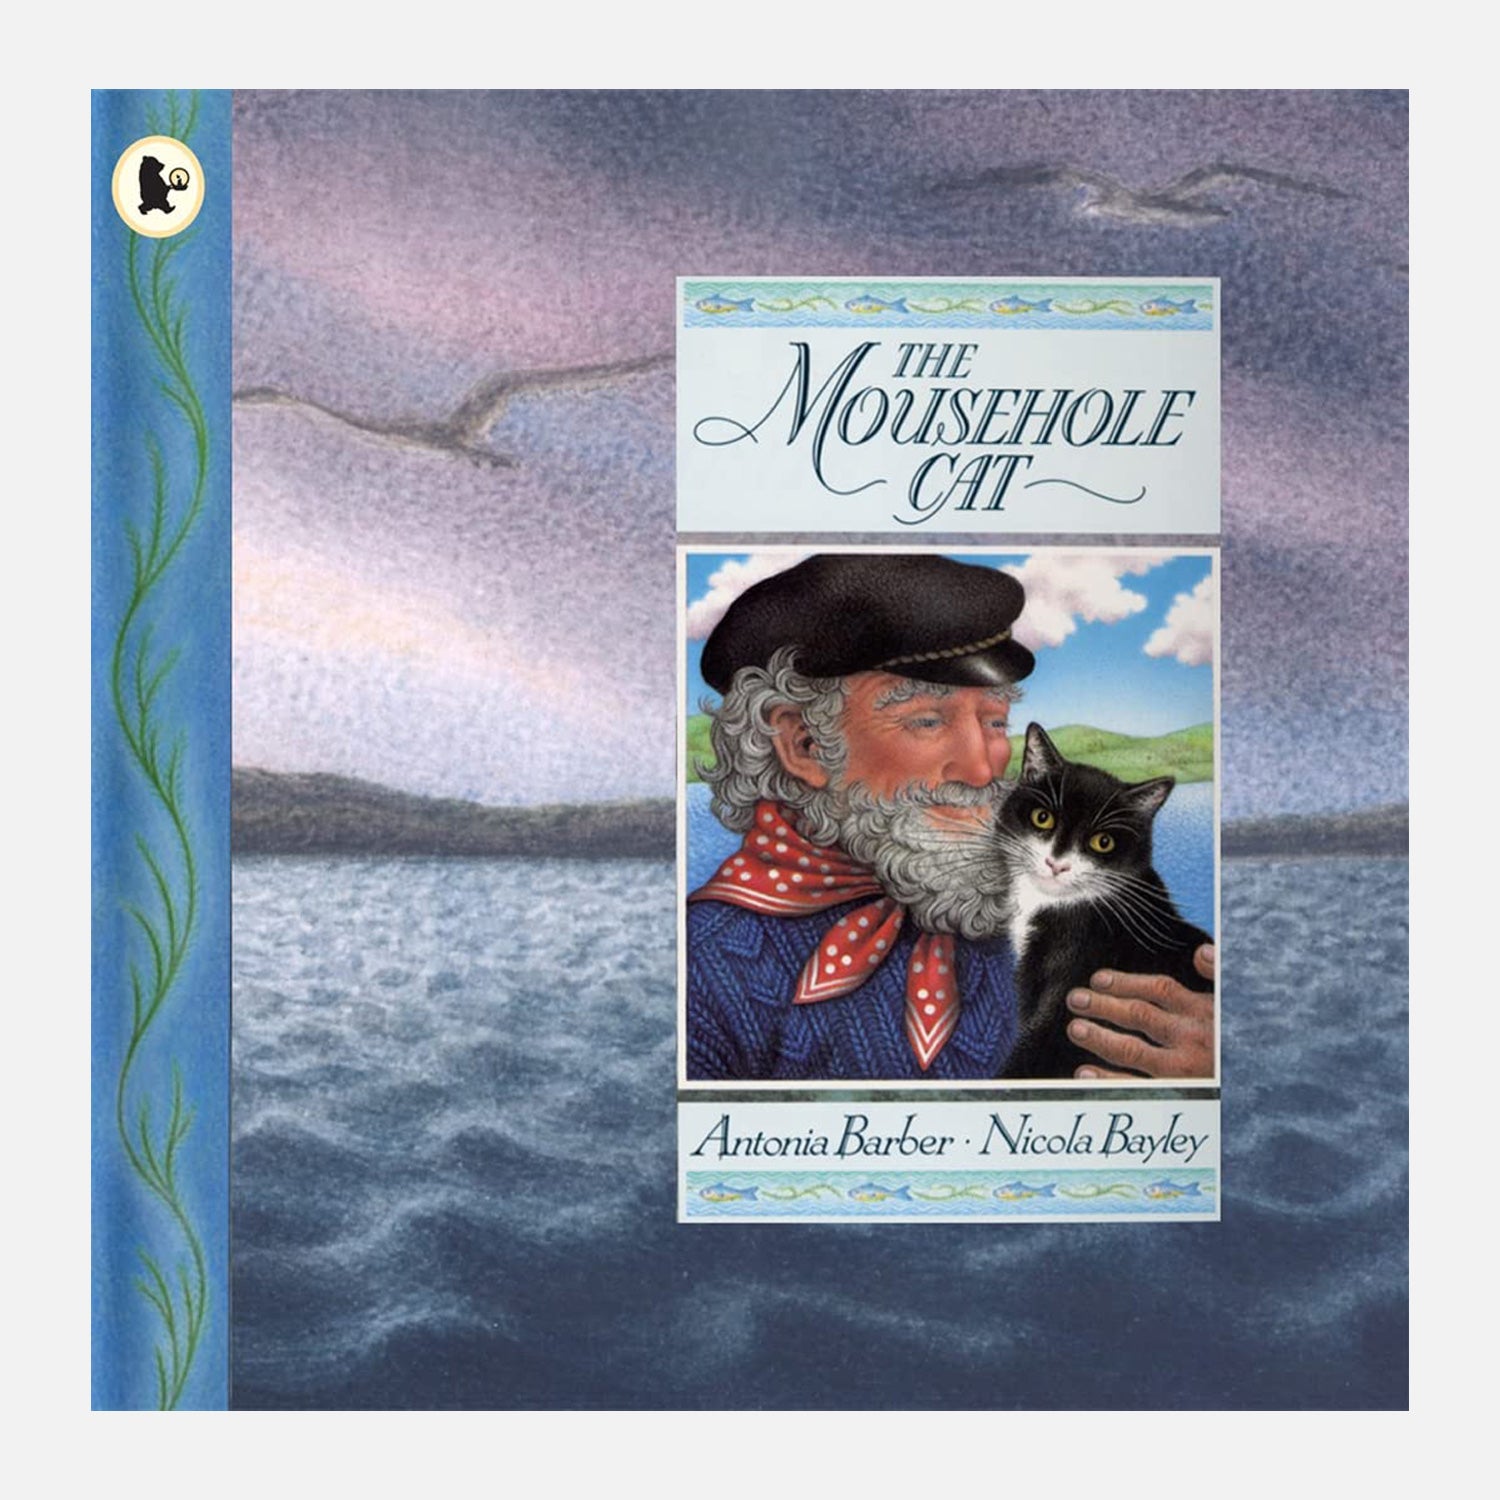 A photo of The Mousehole Cat children's book.